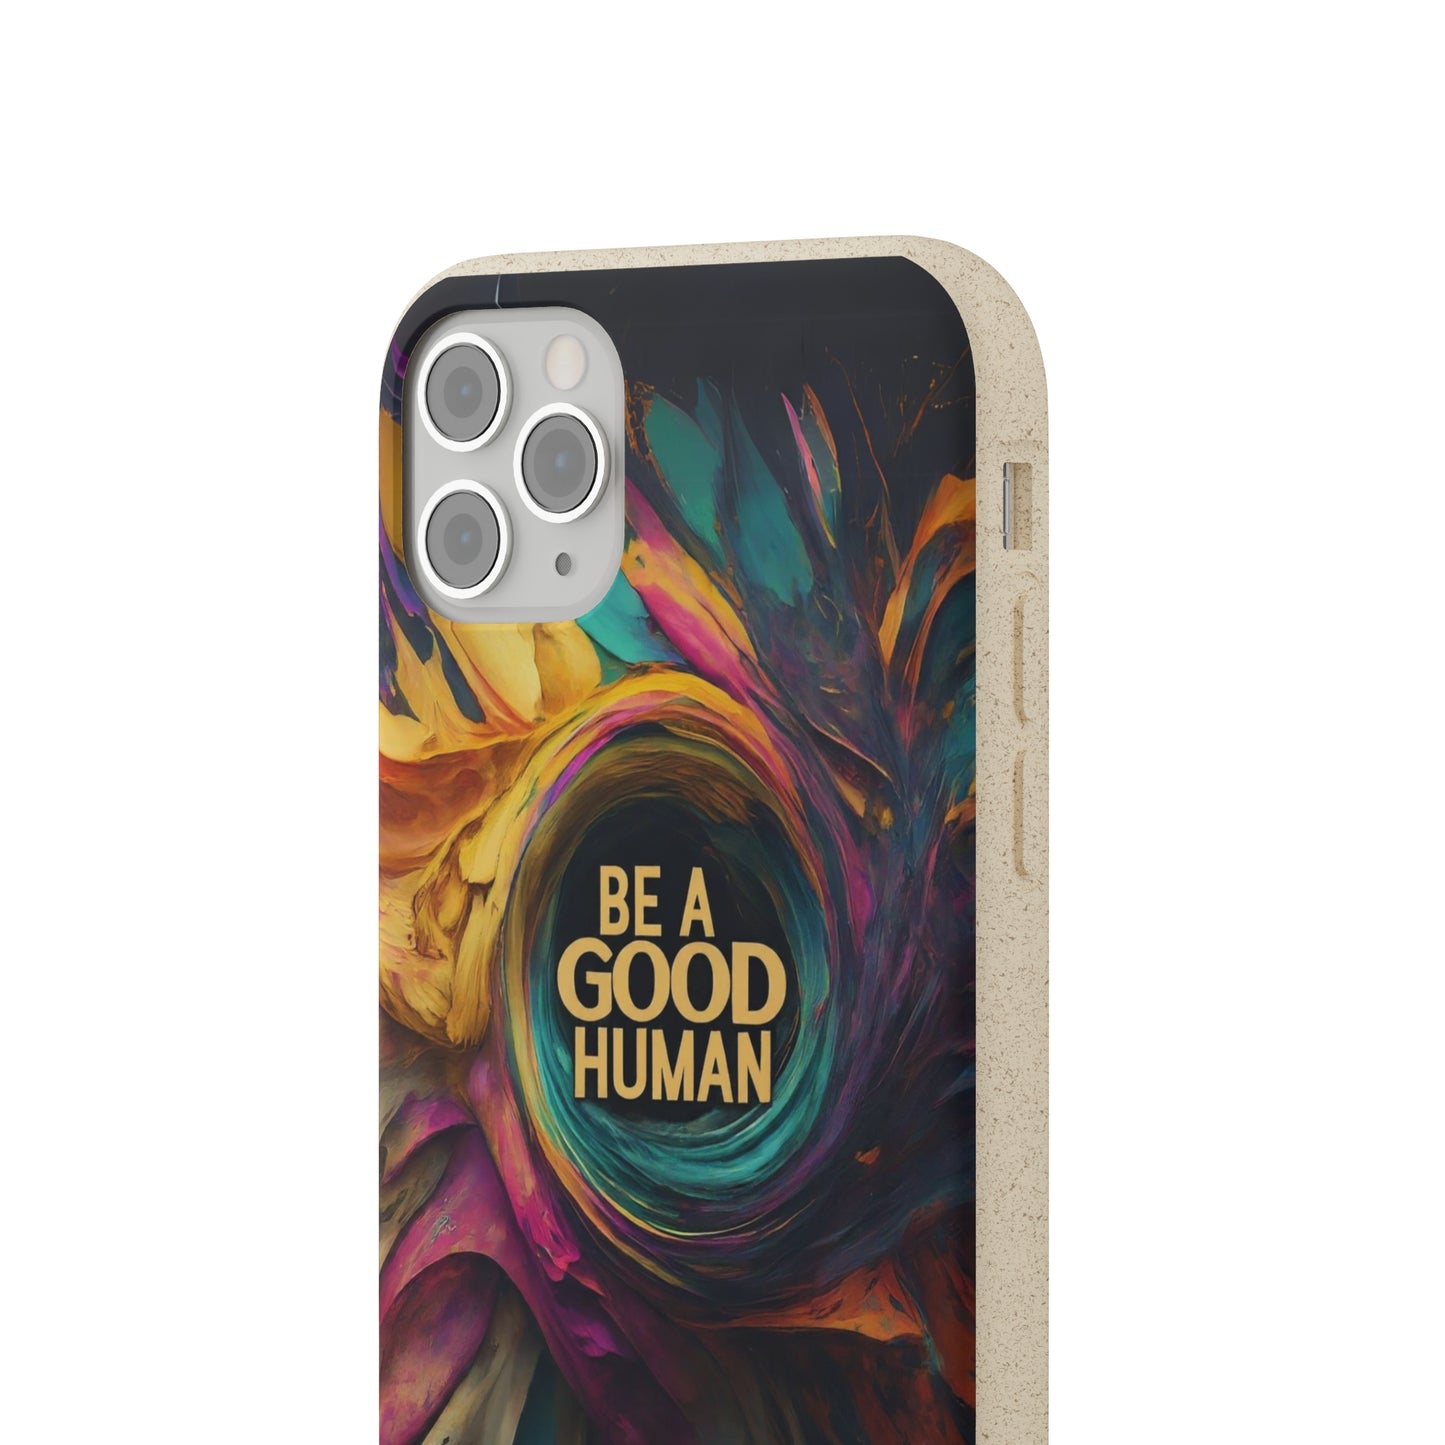 "Be A Good Human" Biodegradable Phone Case